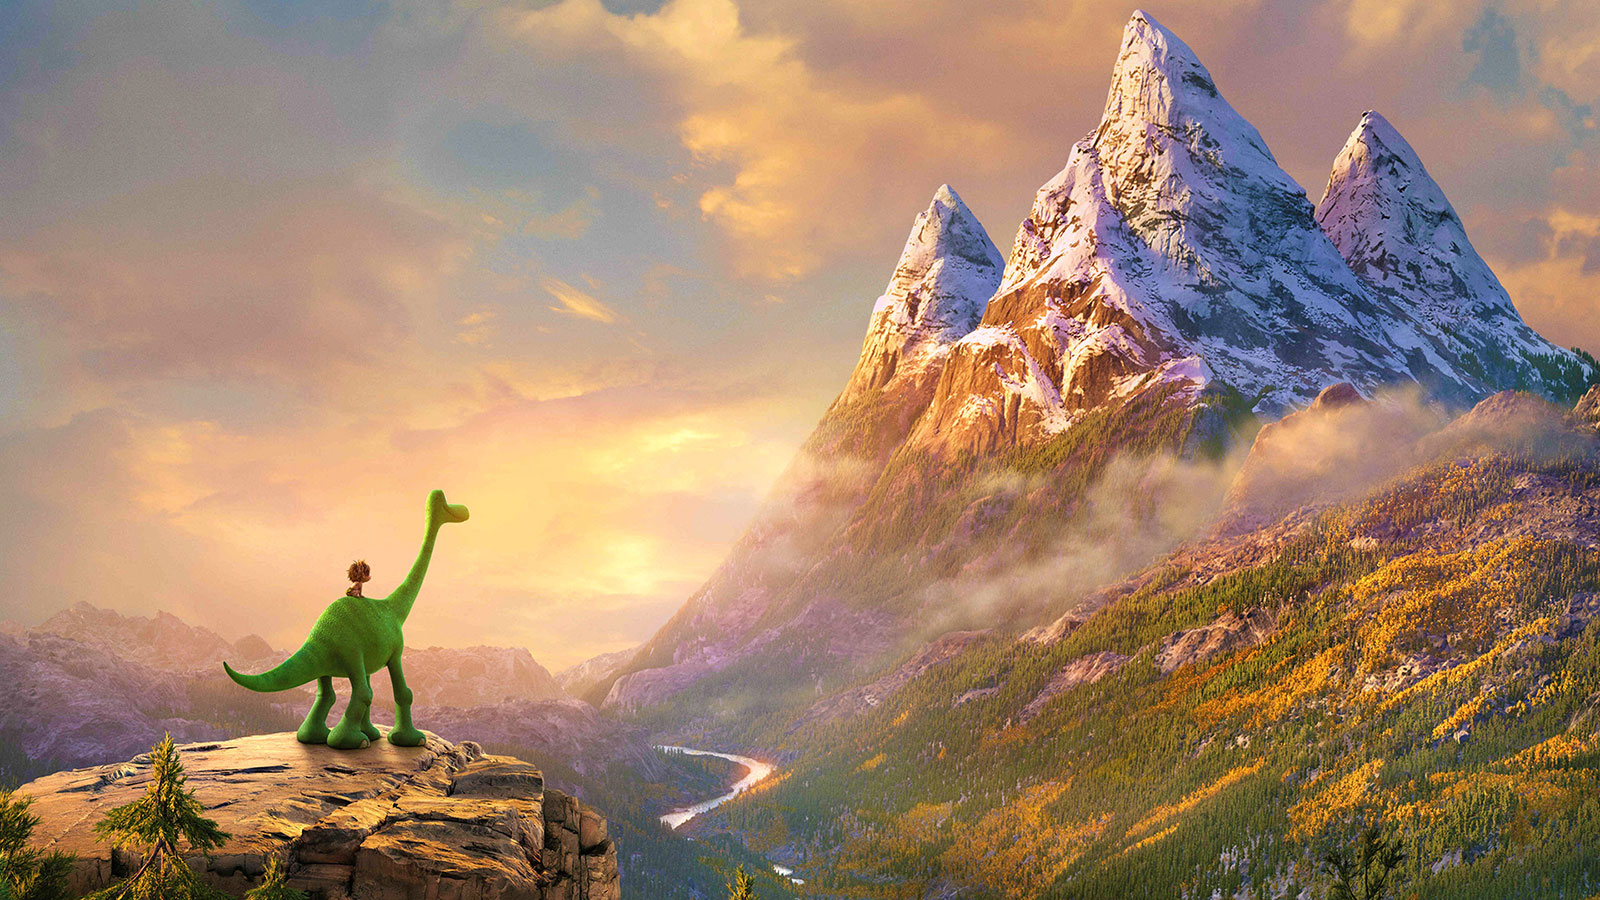 Decide If These Pixar Movies Are Overrated or Underrated and We’ll Guess Your Generation The Good Dinosaur